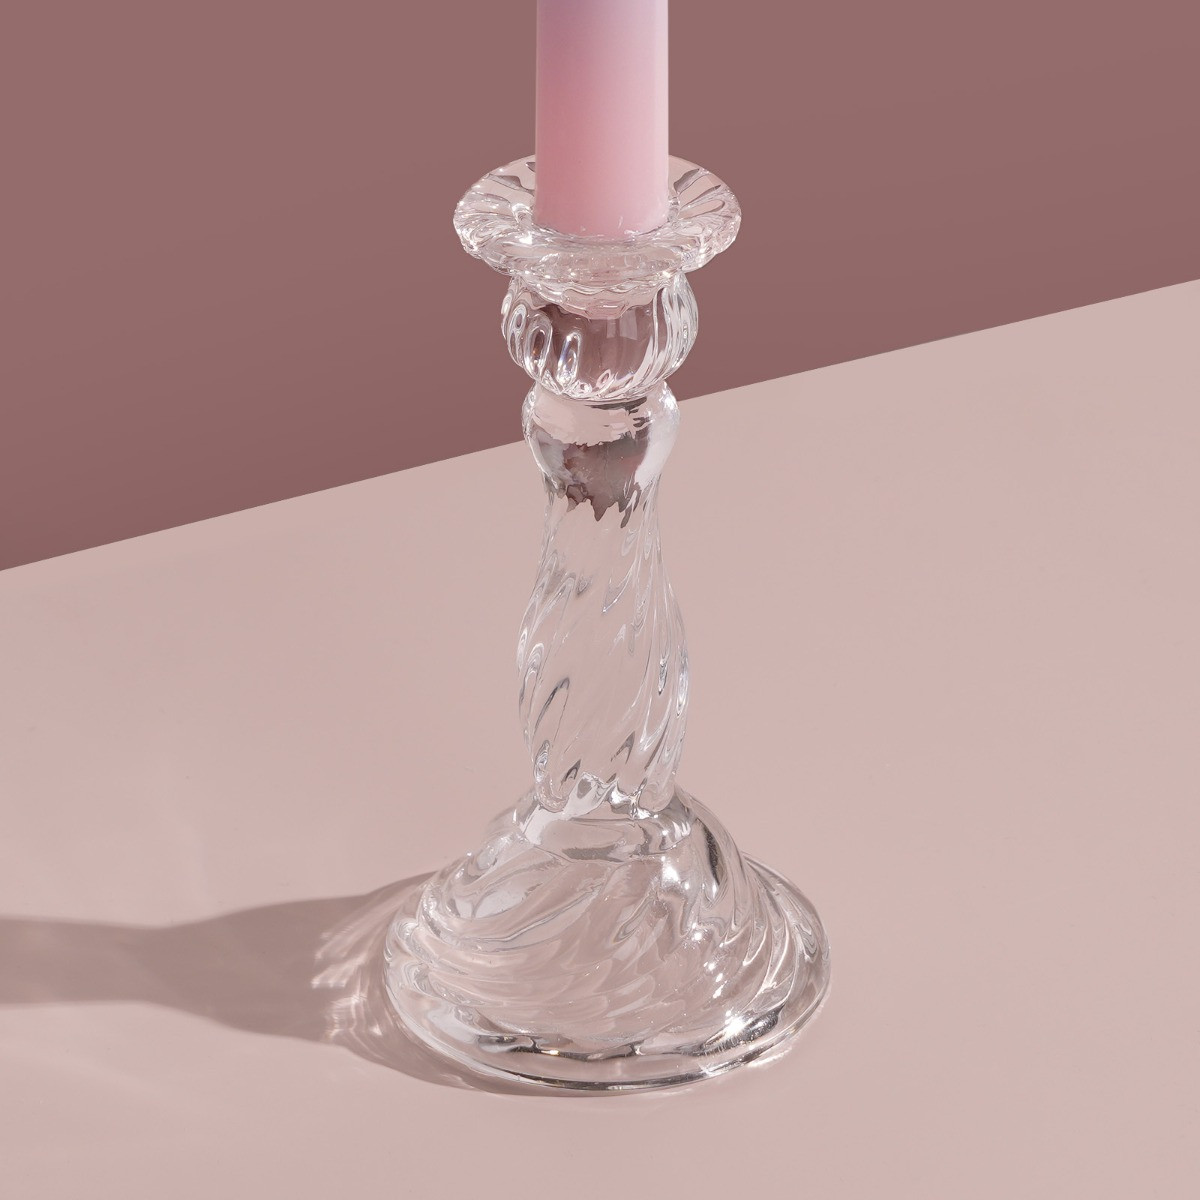 OHS Textured Twist Taper Glass Candle Holder>